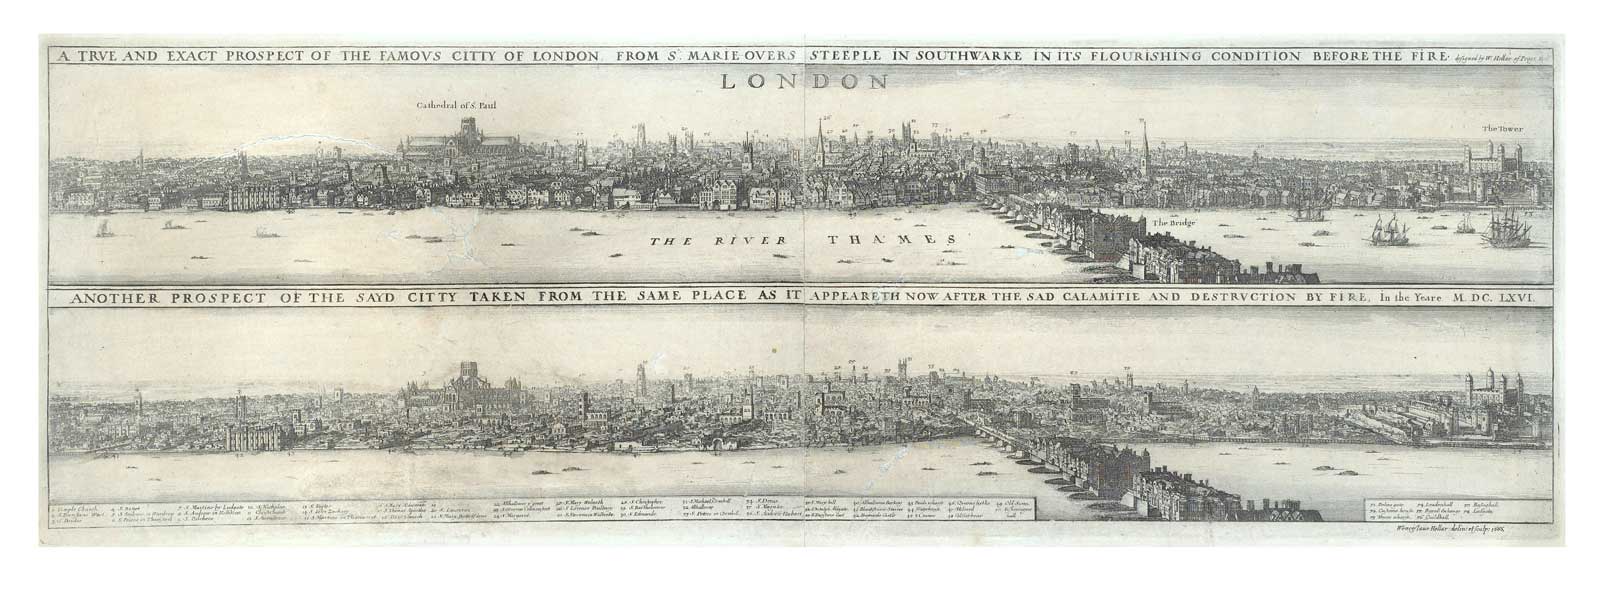 Panorama: Two views of the City of London across the River Thames, taken from the steeple of Southwark Cathedral, printed parallel, one on top of the other. The top view is of the city before the Great Fire of London in 1666, and the bottom image taken after the disaster, with a key detailing the buildings. Due to his earlier mapping of the city, Hollar was able to make the comparisons and shows the entire extent of the burnt out area, including the ruin of St Paul's and the untouched Tower of London.
